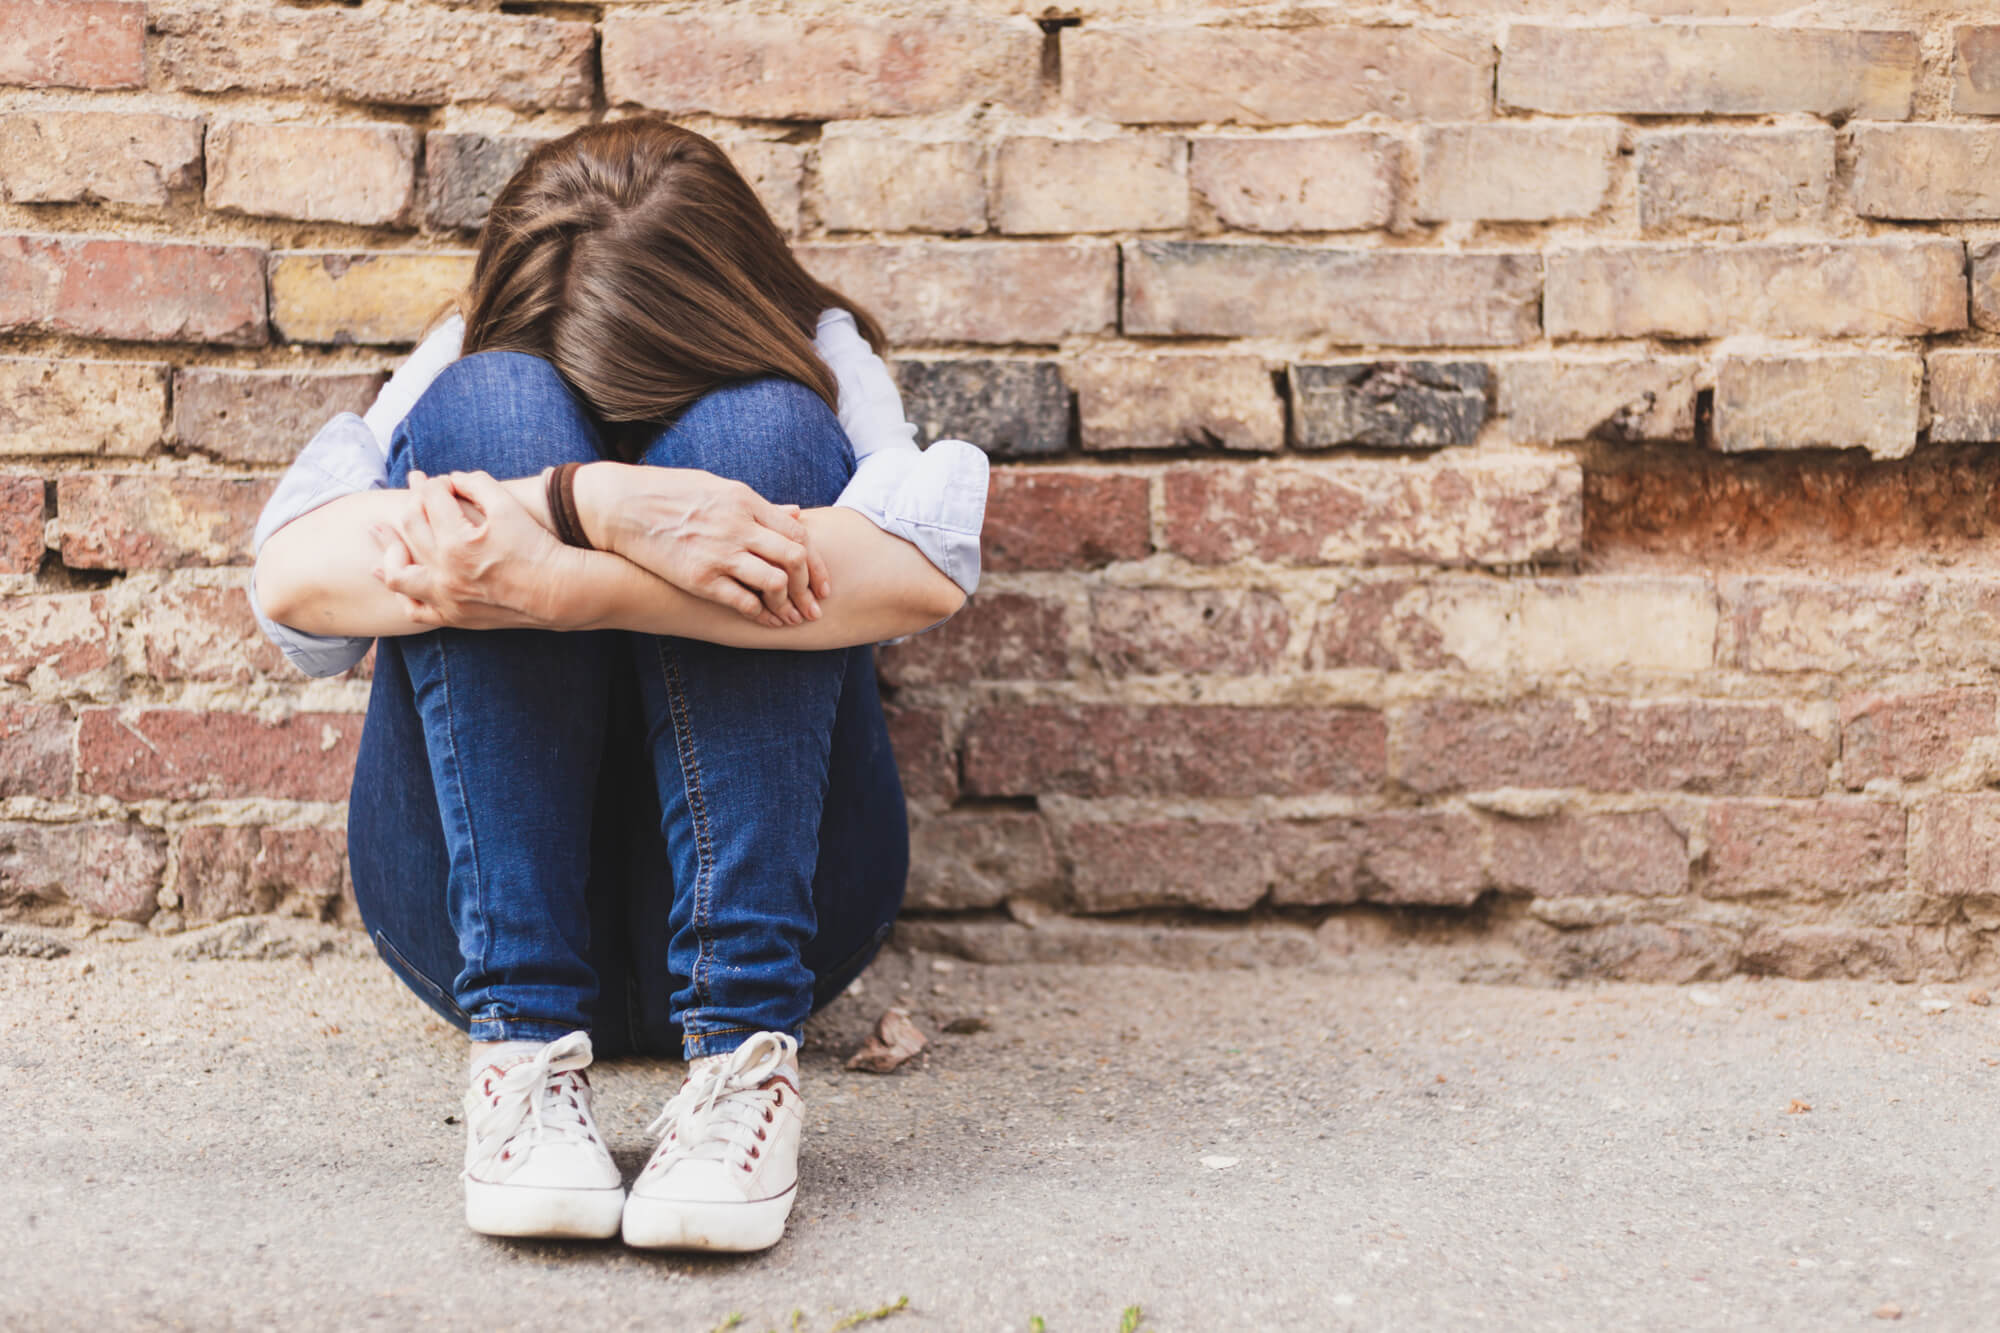 Unacceptable Failures in Safeguarding Vulnerable Adolescents: A Call to Action for Comprehensive Government Reform  feature image